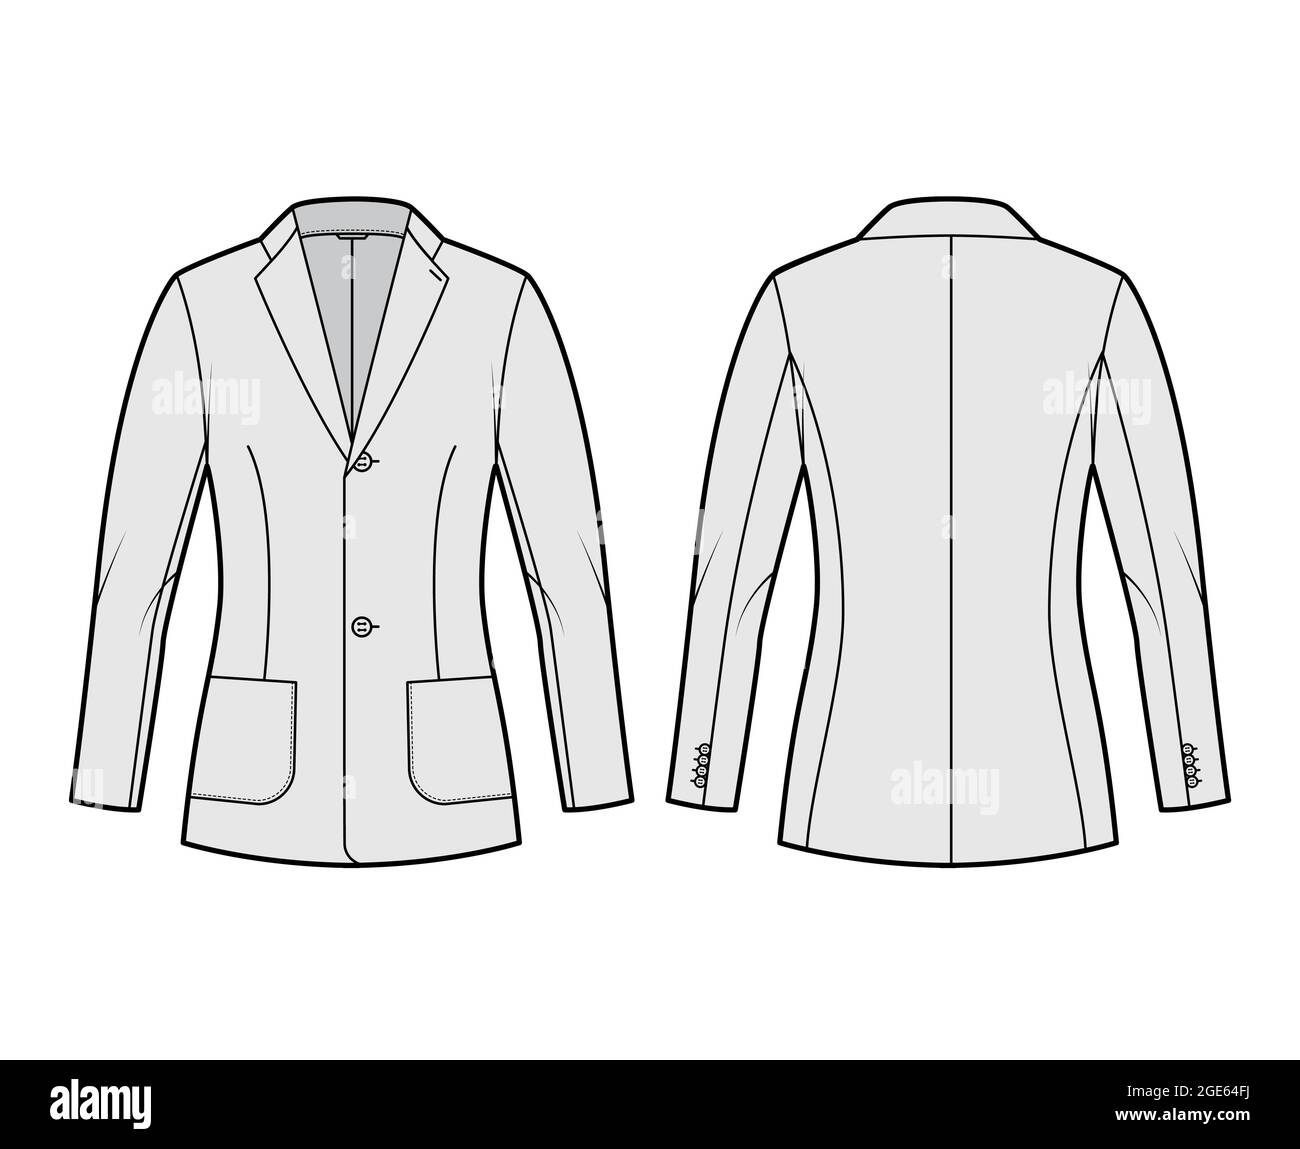 Blazer fitted jacket suit technical fashion illustration with single breasted, long sleeves, notched lapel collar, patch pockets, hip length. Flat coat template front, back, grey color. Women, men CAD Stock Vector